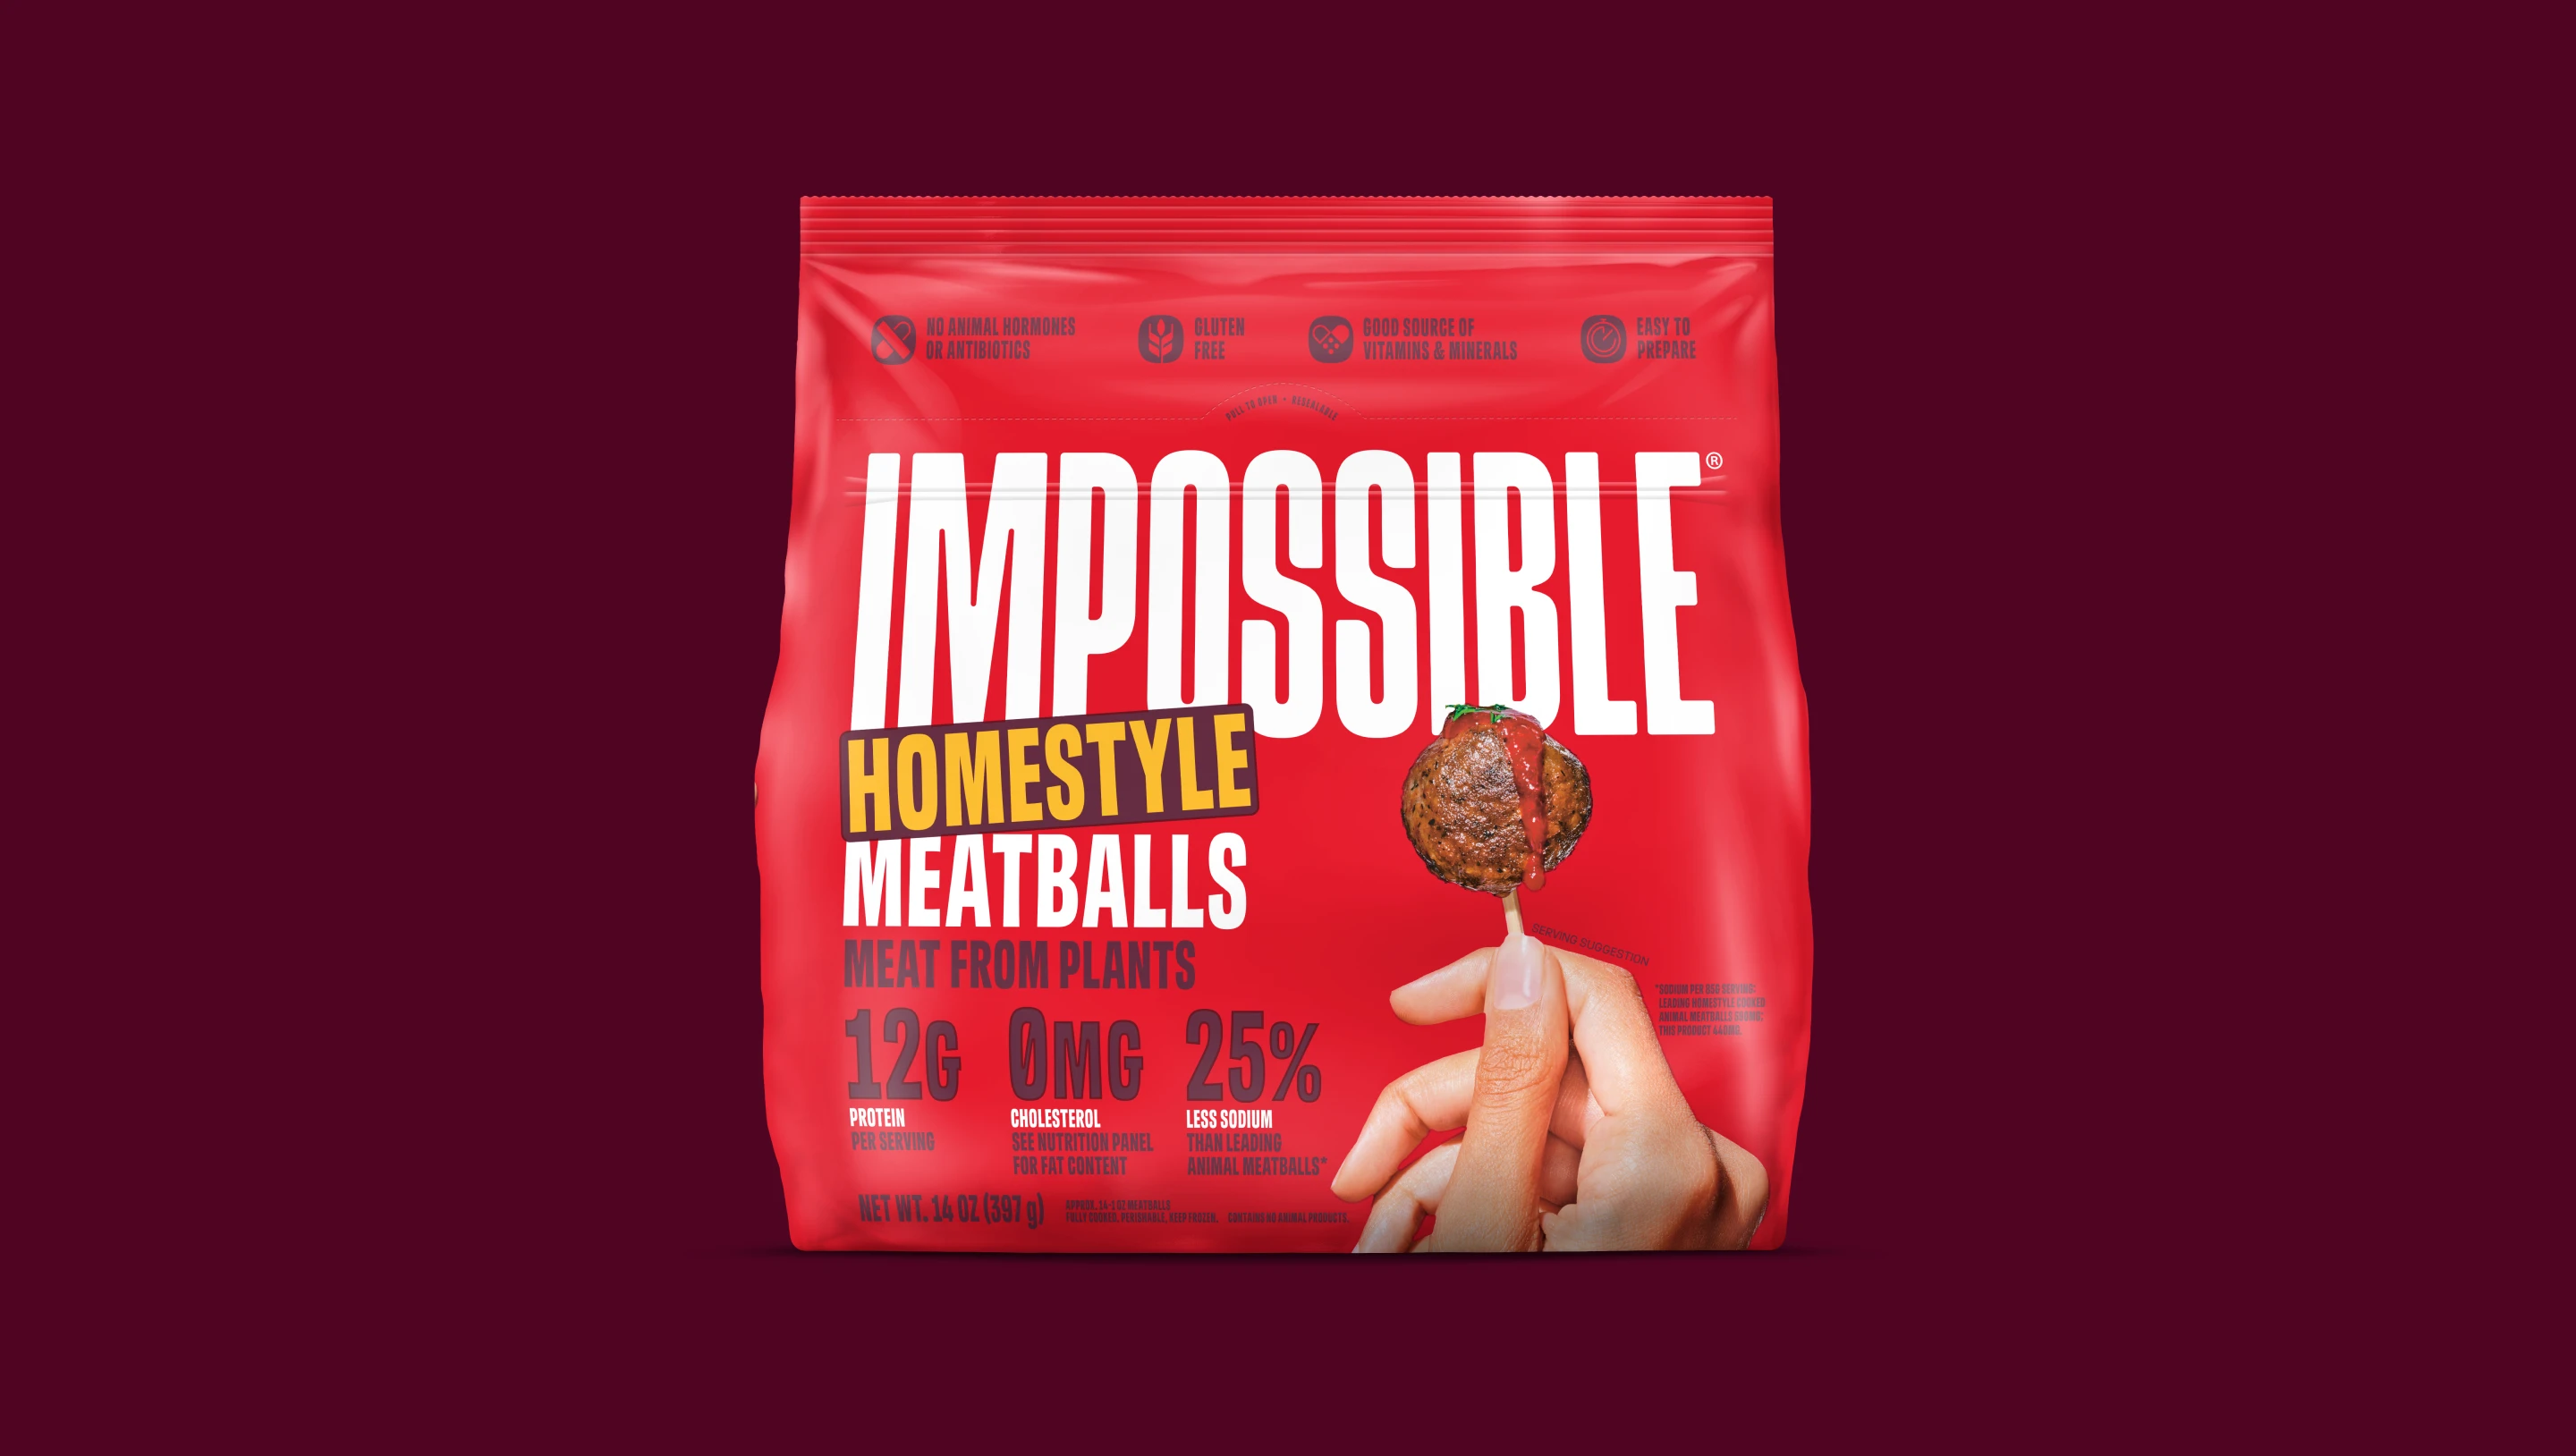 Impossible Homestyle Meatballs meat from plants front of package